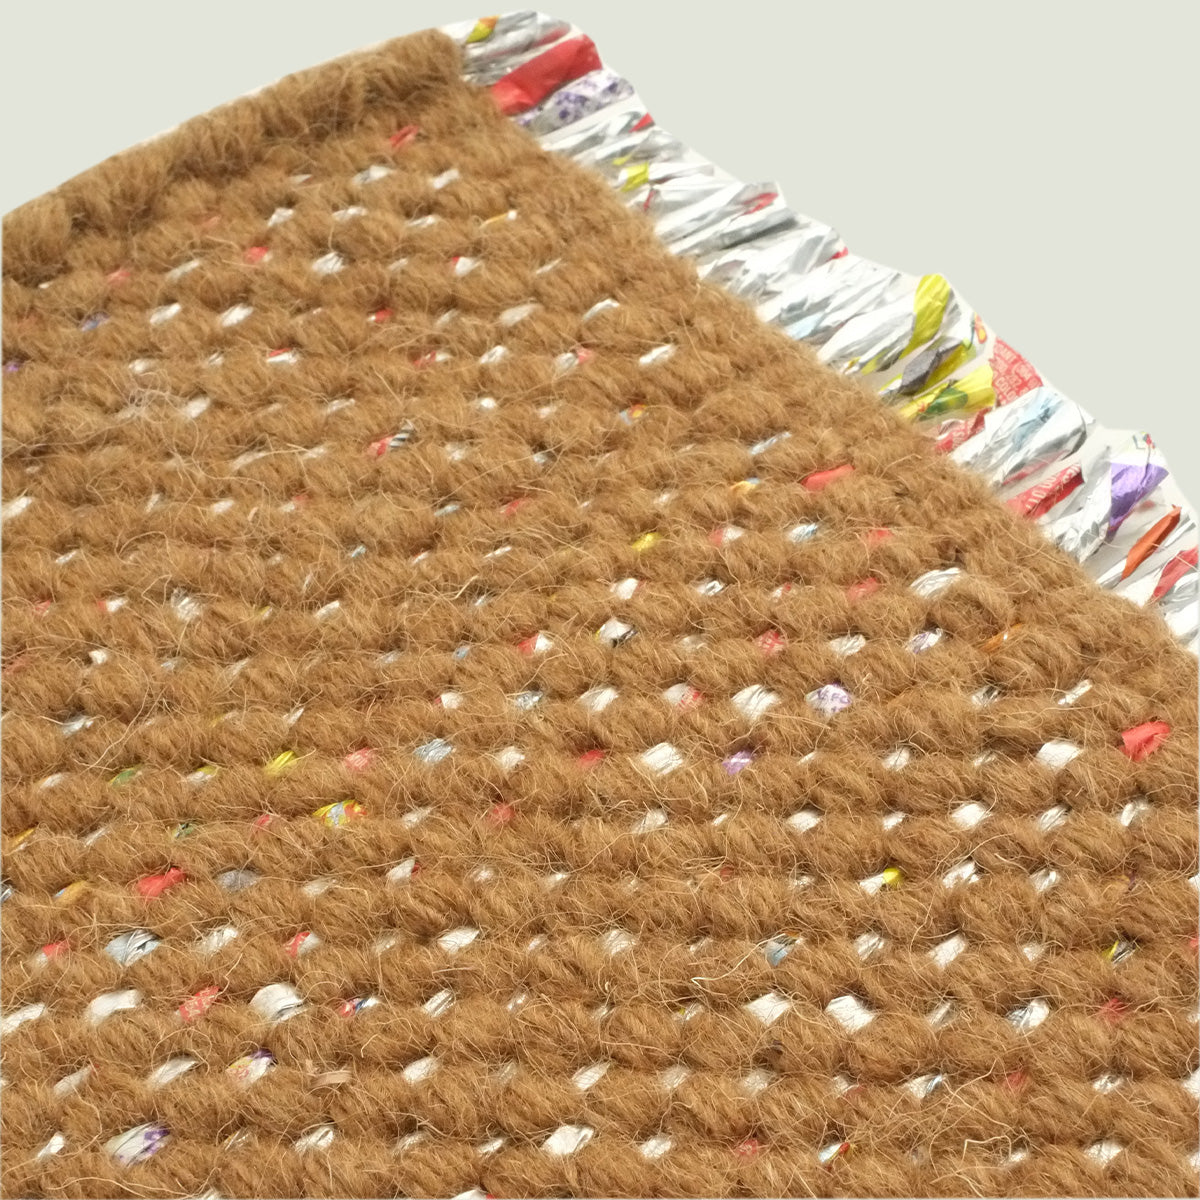 Candy Wrapper Rug_Classic_everybody loves nuts